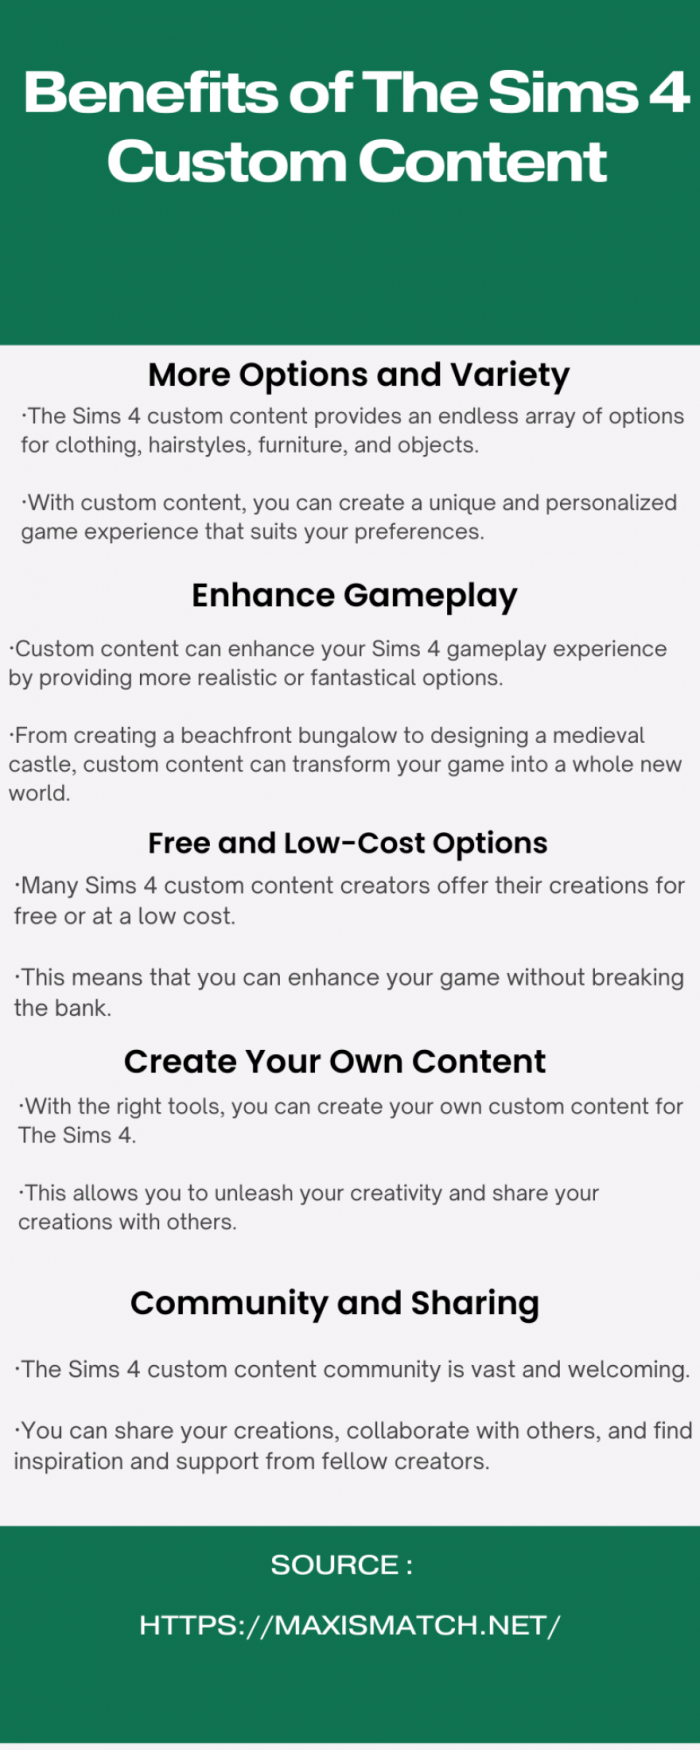 The Ultimate Guide to Custom Content for The Sims 4